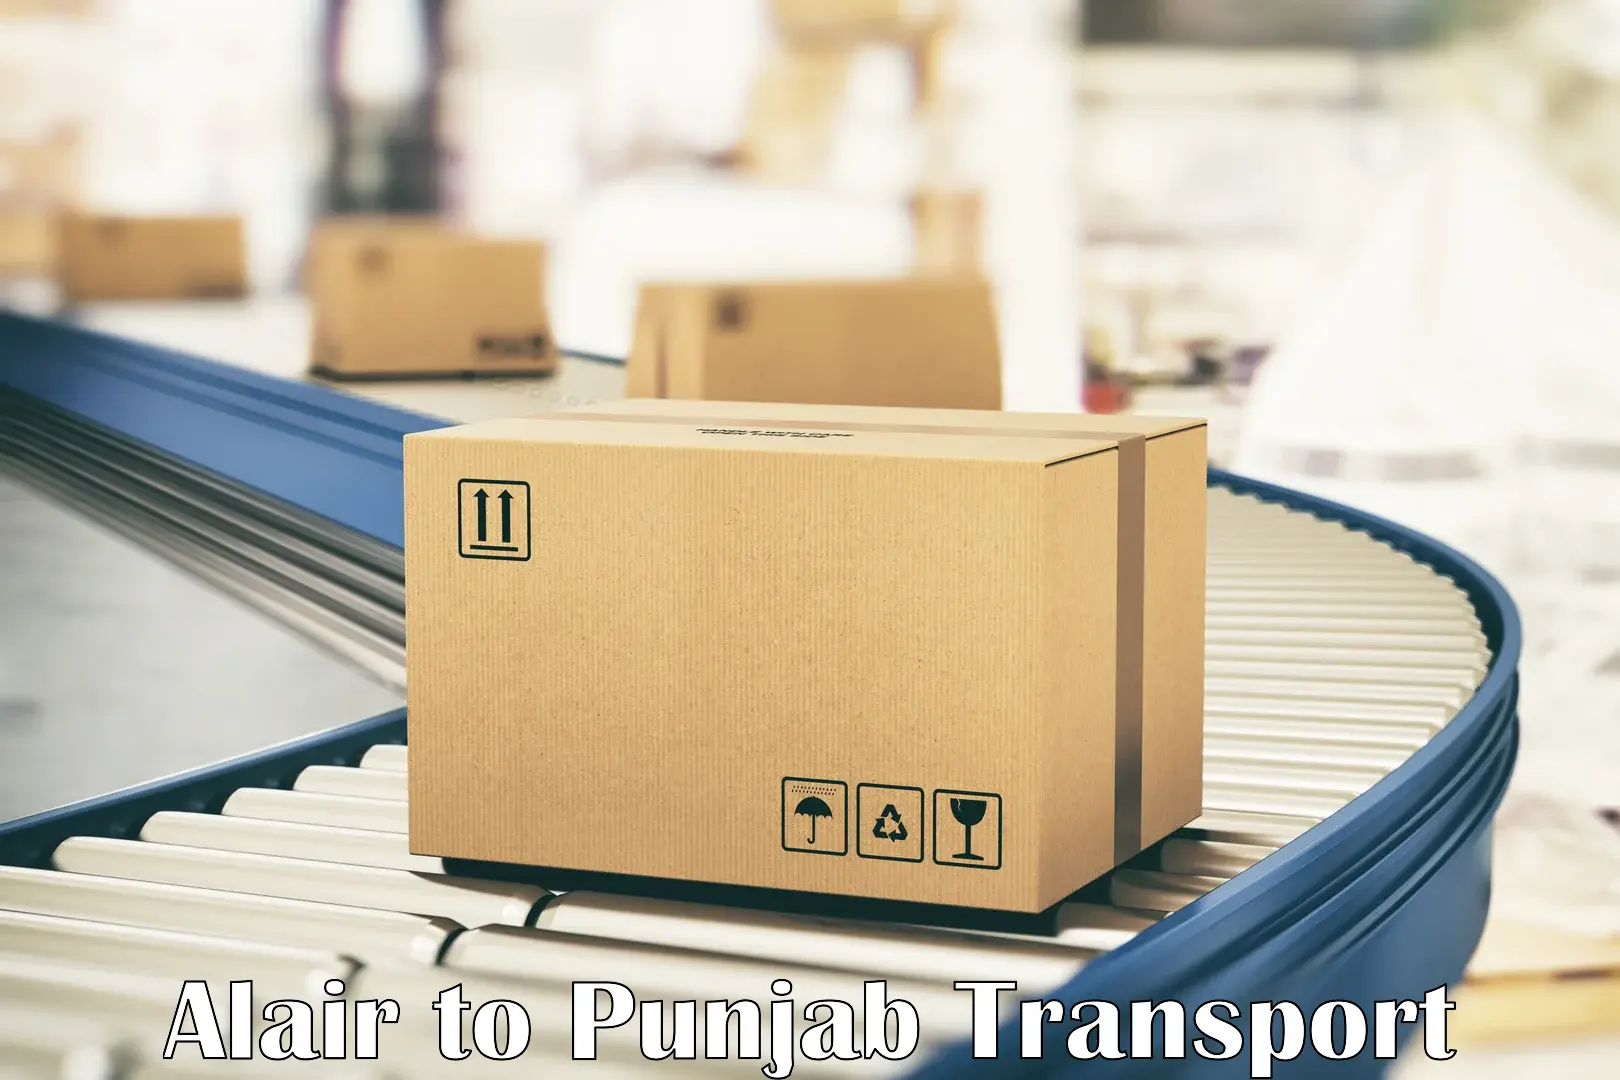 Container transport service Alair to Punjab